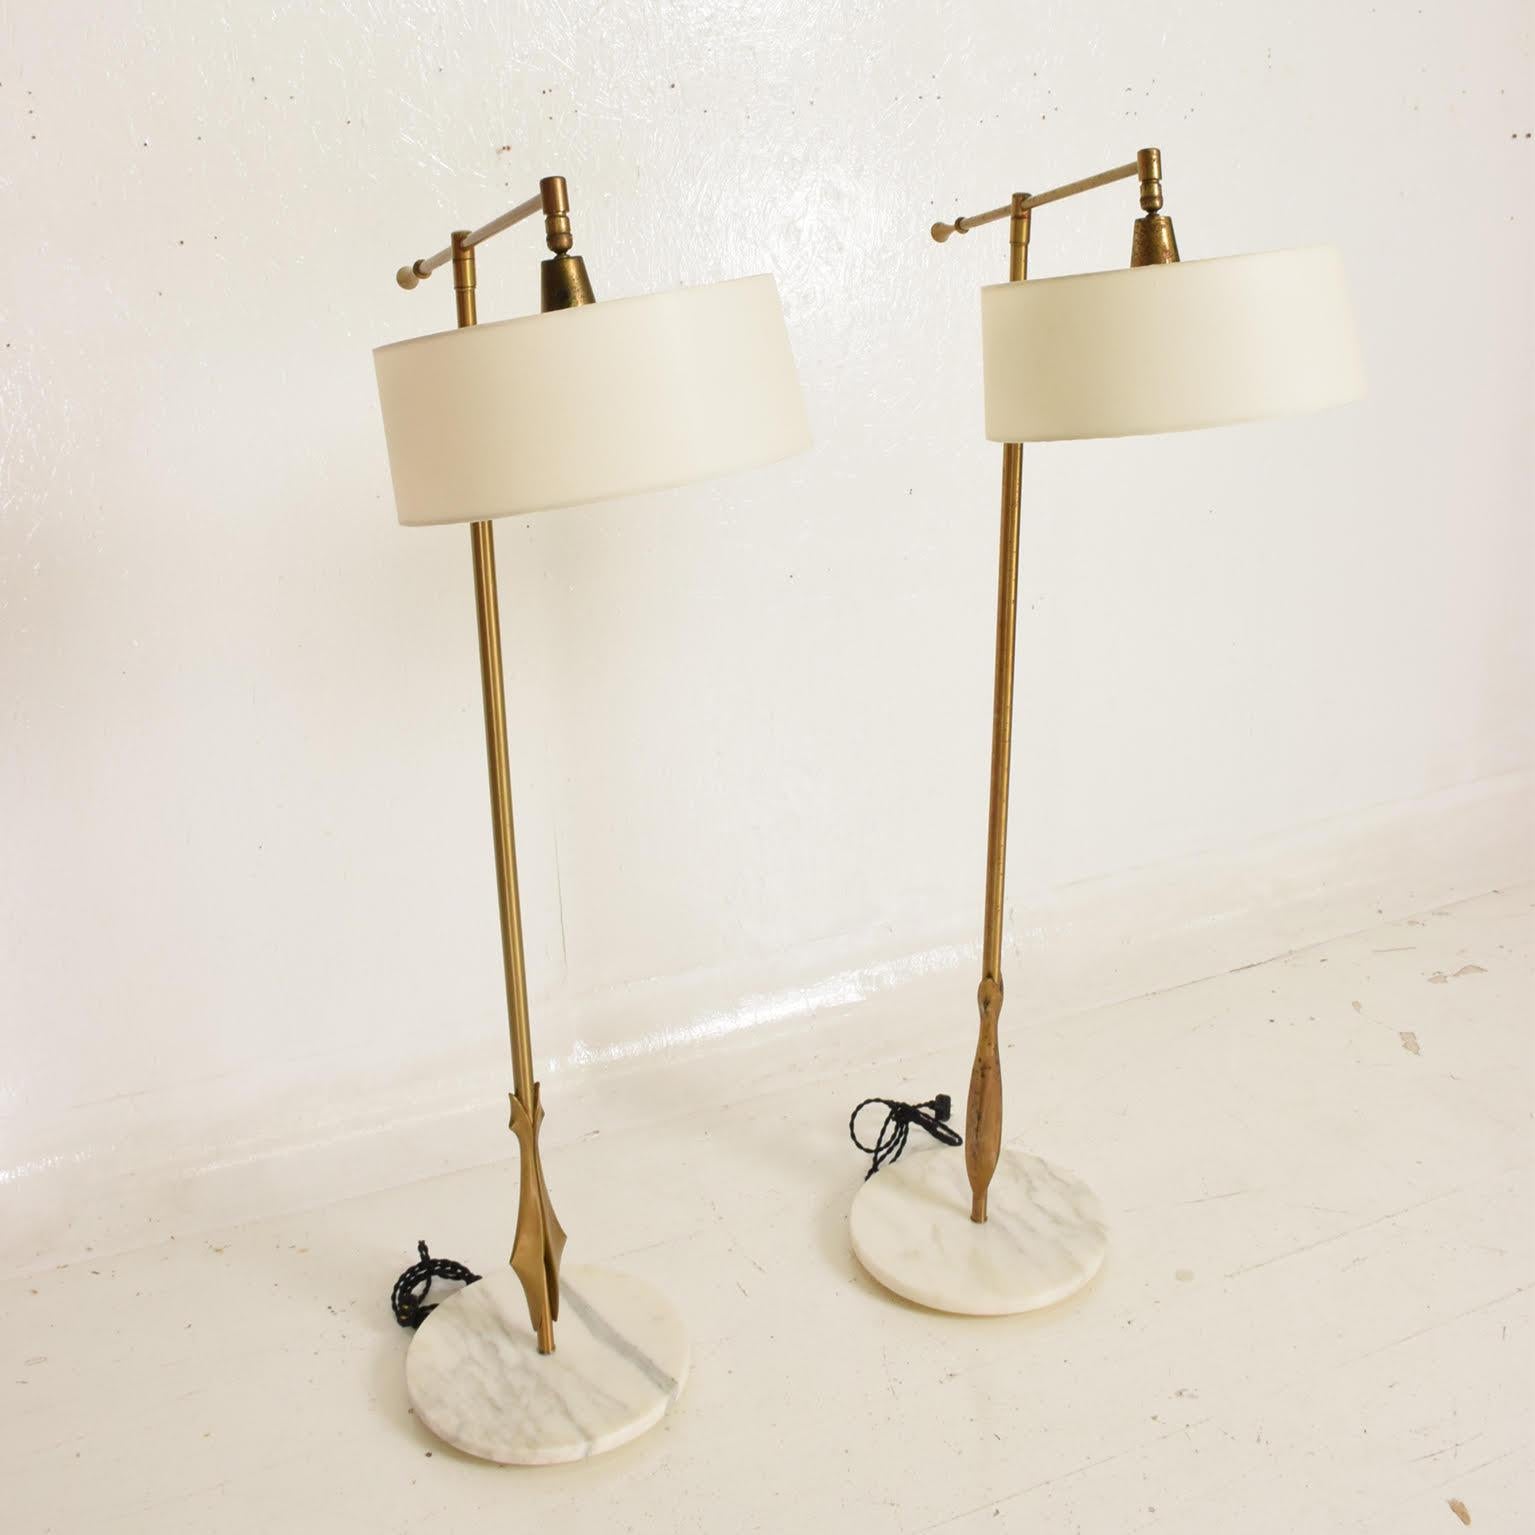 Rare Pair of Floor Lamps by Gerald Thurston with Original Shade and Marble Base 1